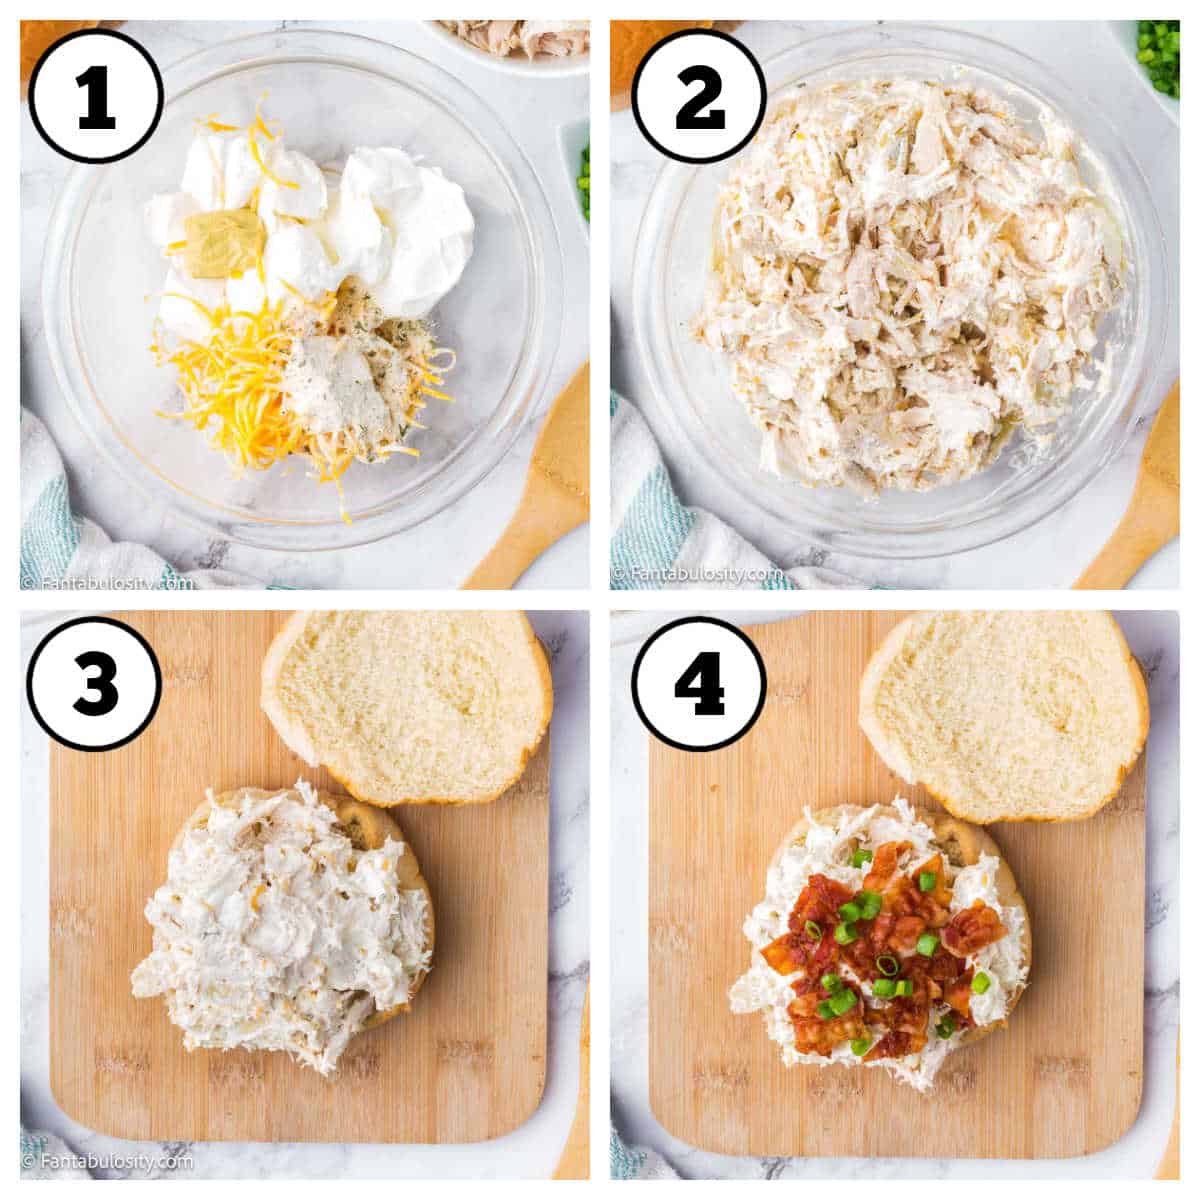 Steps 1-4 of how to make chicken bacon ranch sandwiches.